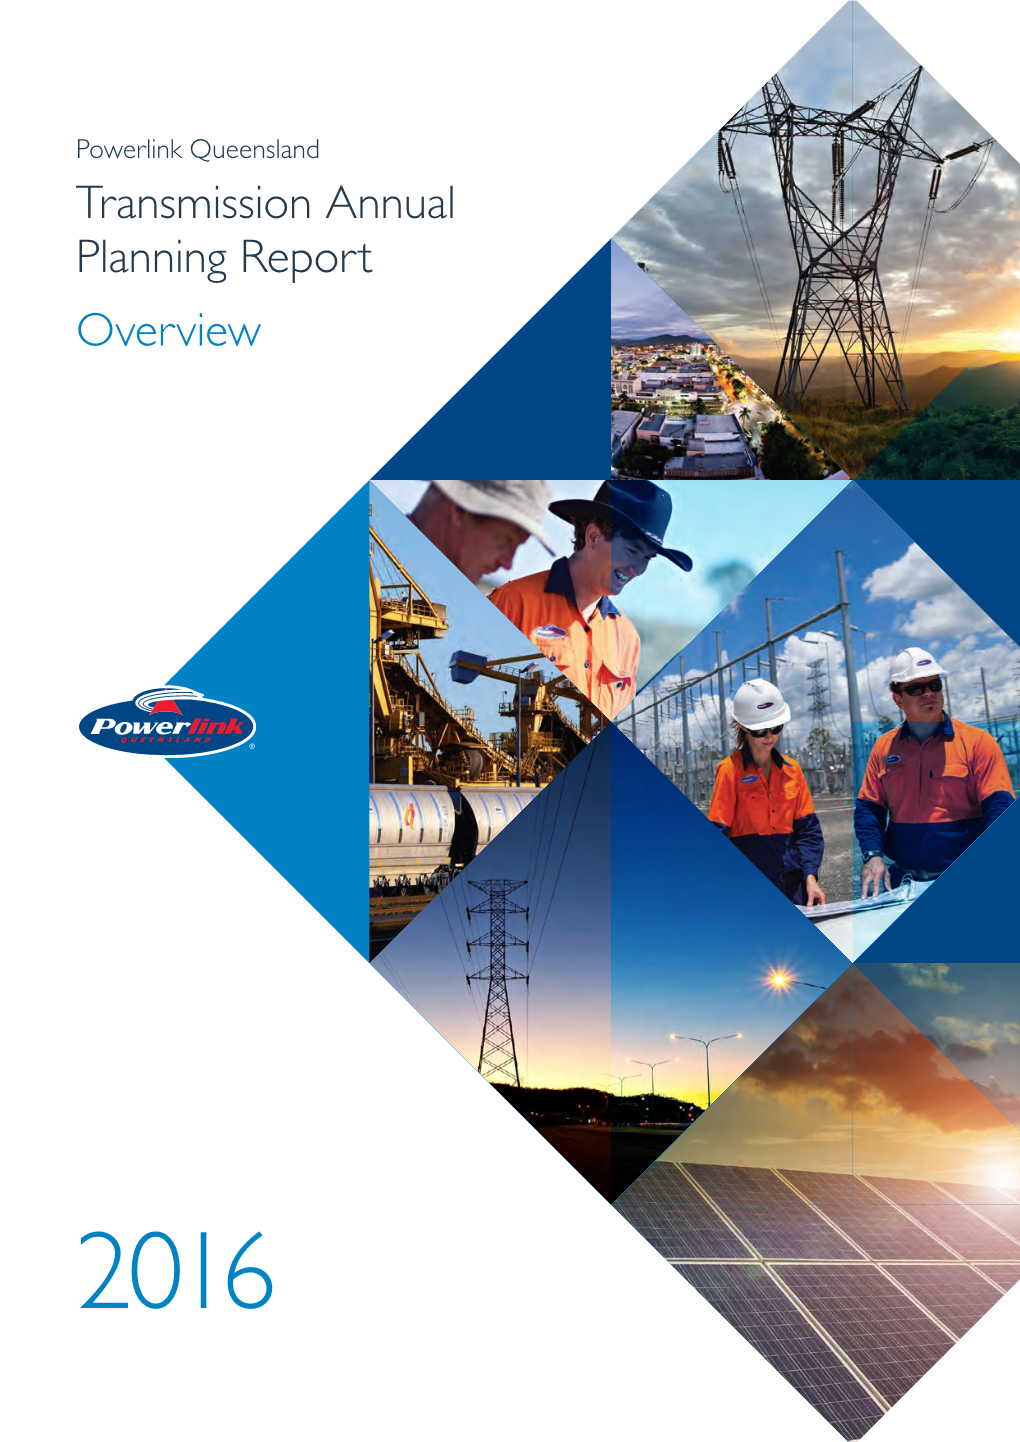 Transmission Annual Planning Report Overview